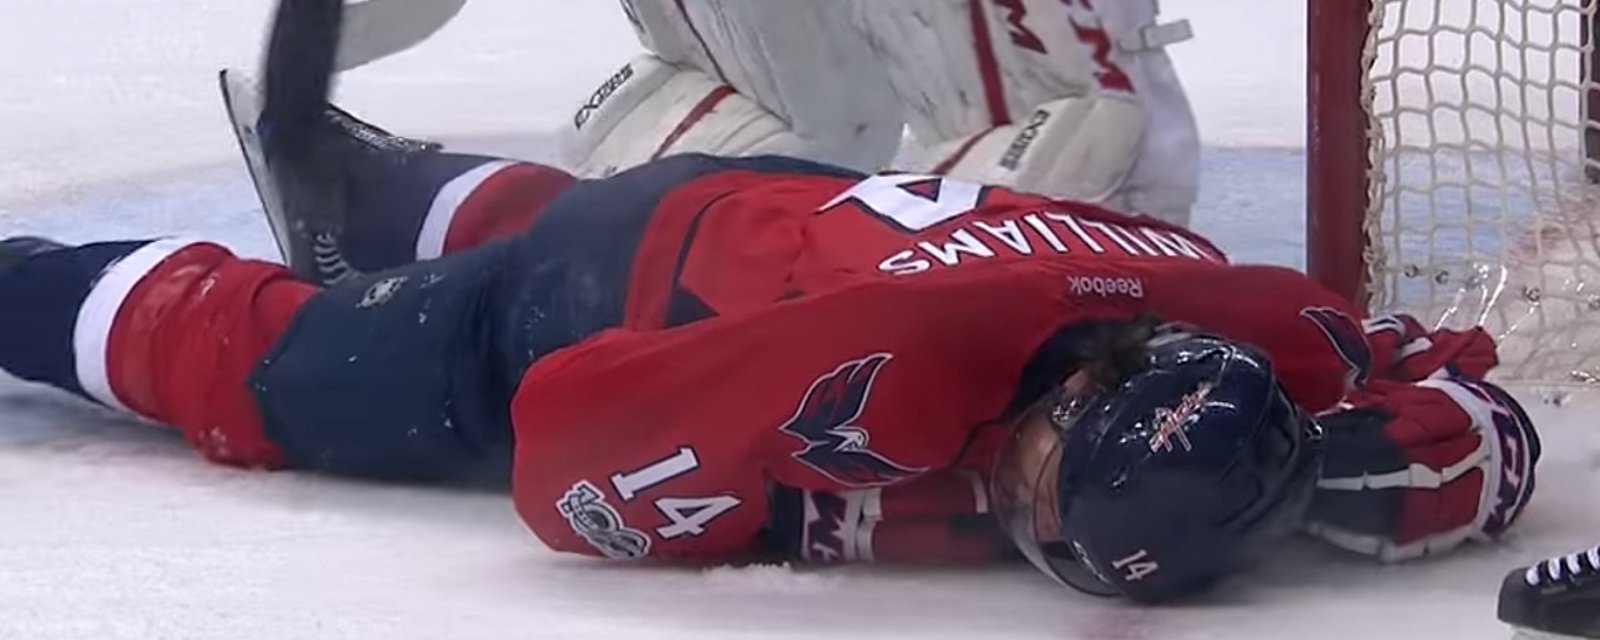 OUCH! Williams goes down after eating a one-timer in the head.